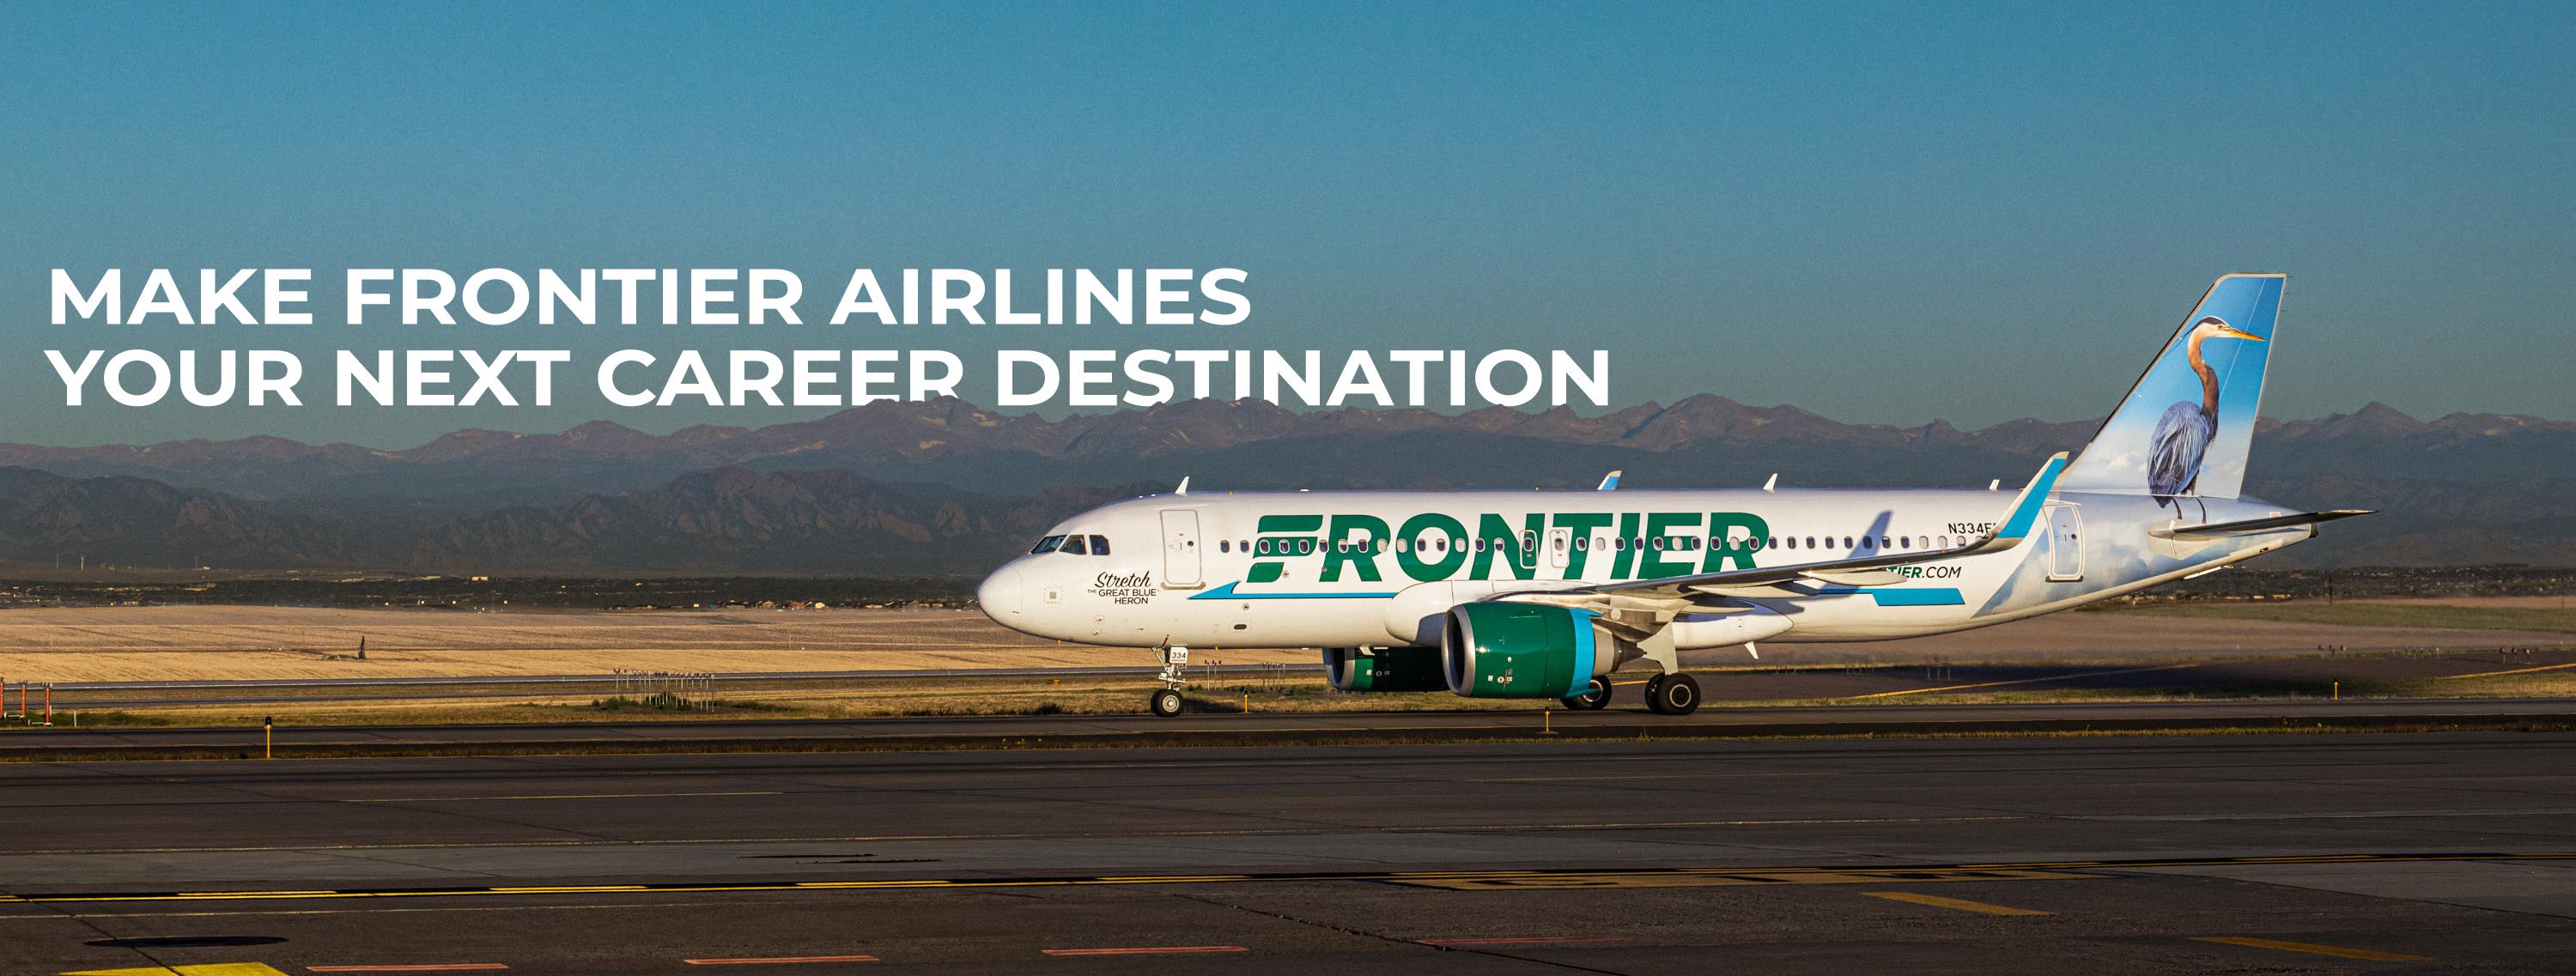 frontier airlines travel agency